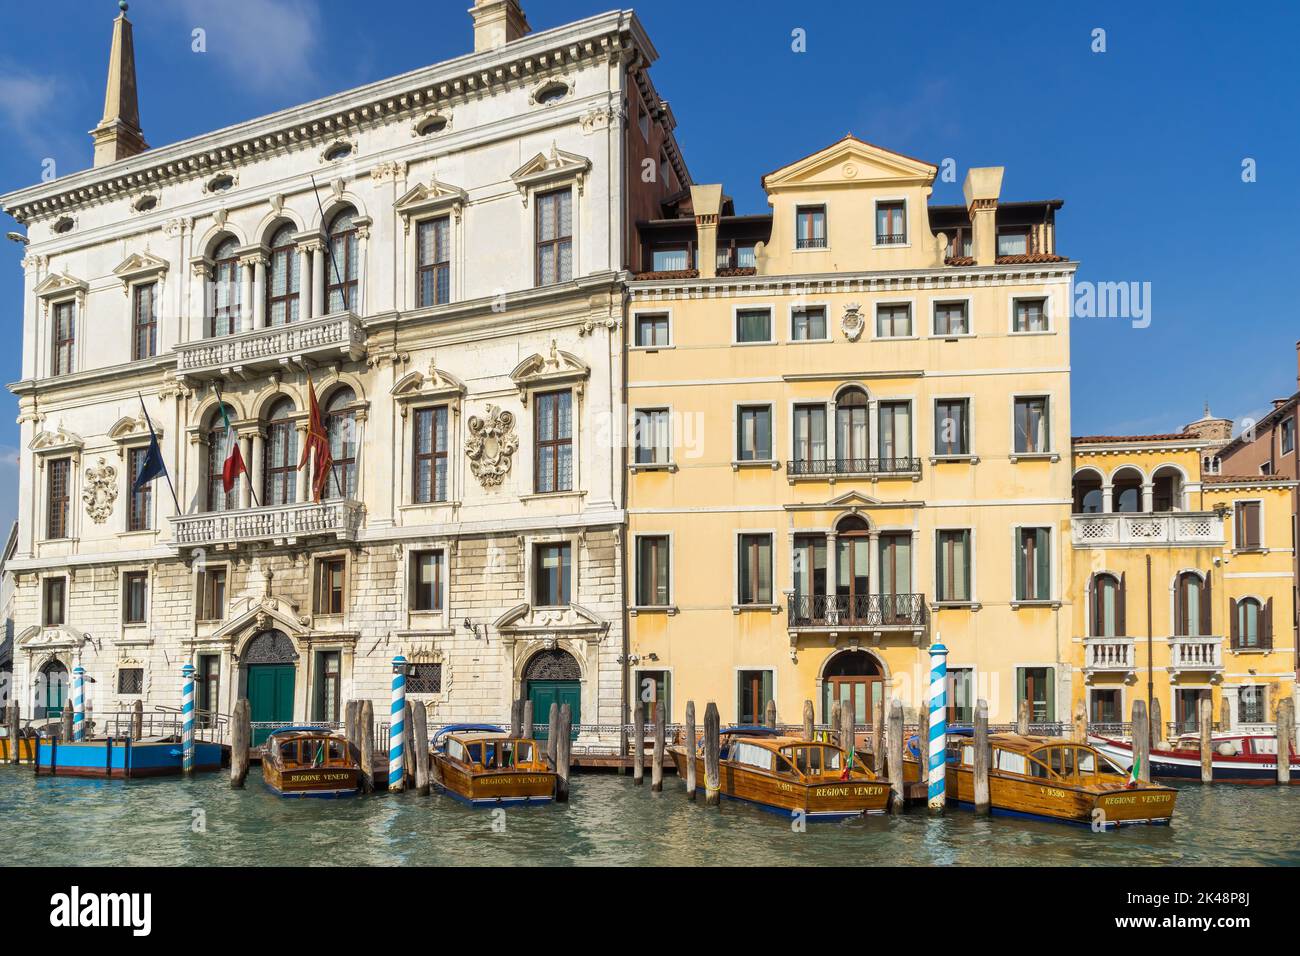 VENICE, ITALY - OCTOBER 12 : Motor launches moored in Venice on October 12, 2014 Stock Photo